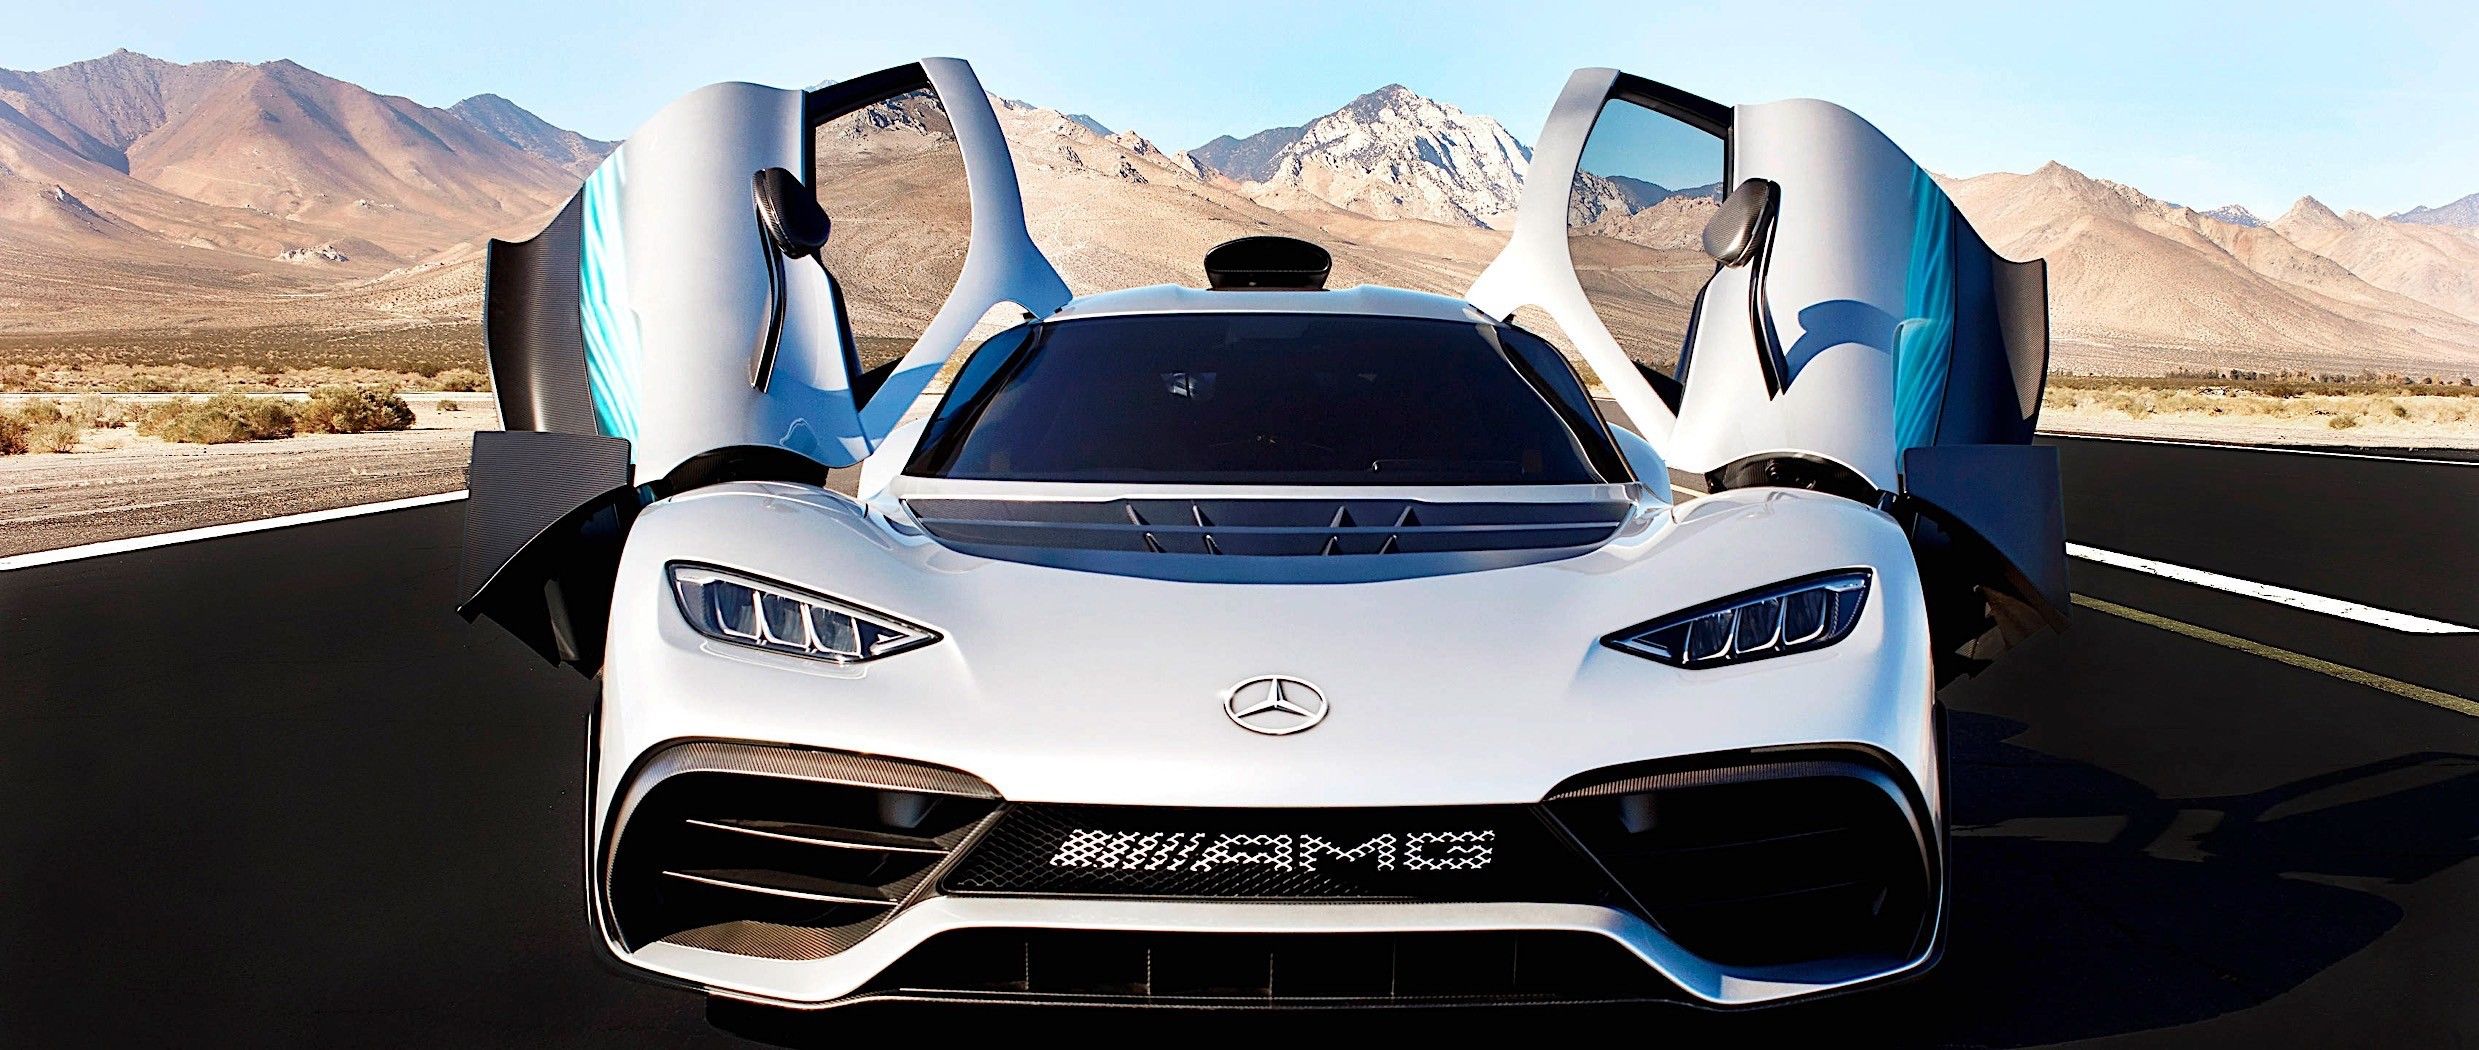 Mercedes-AMG Project One front end